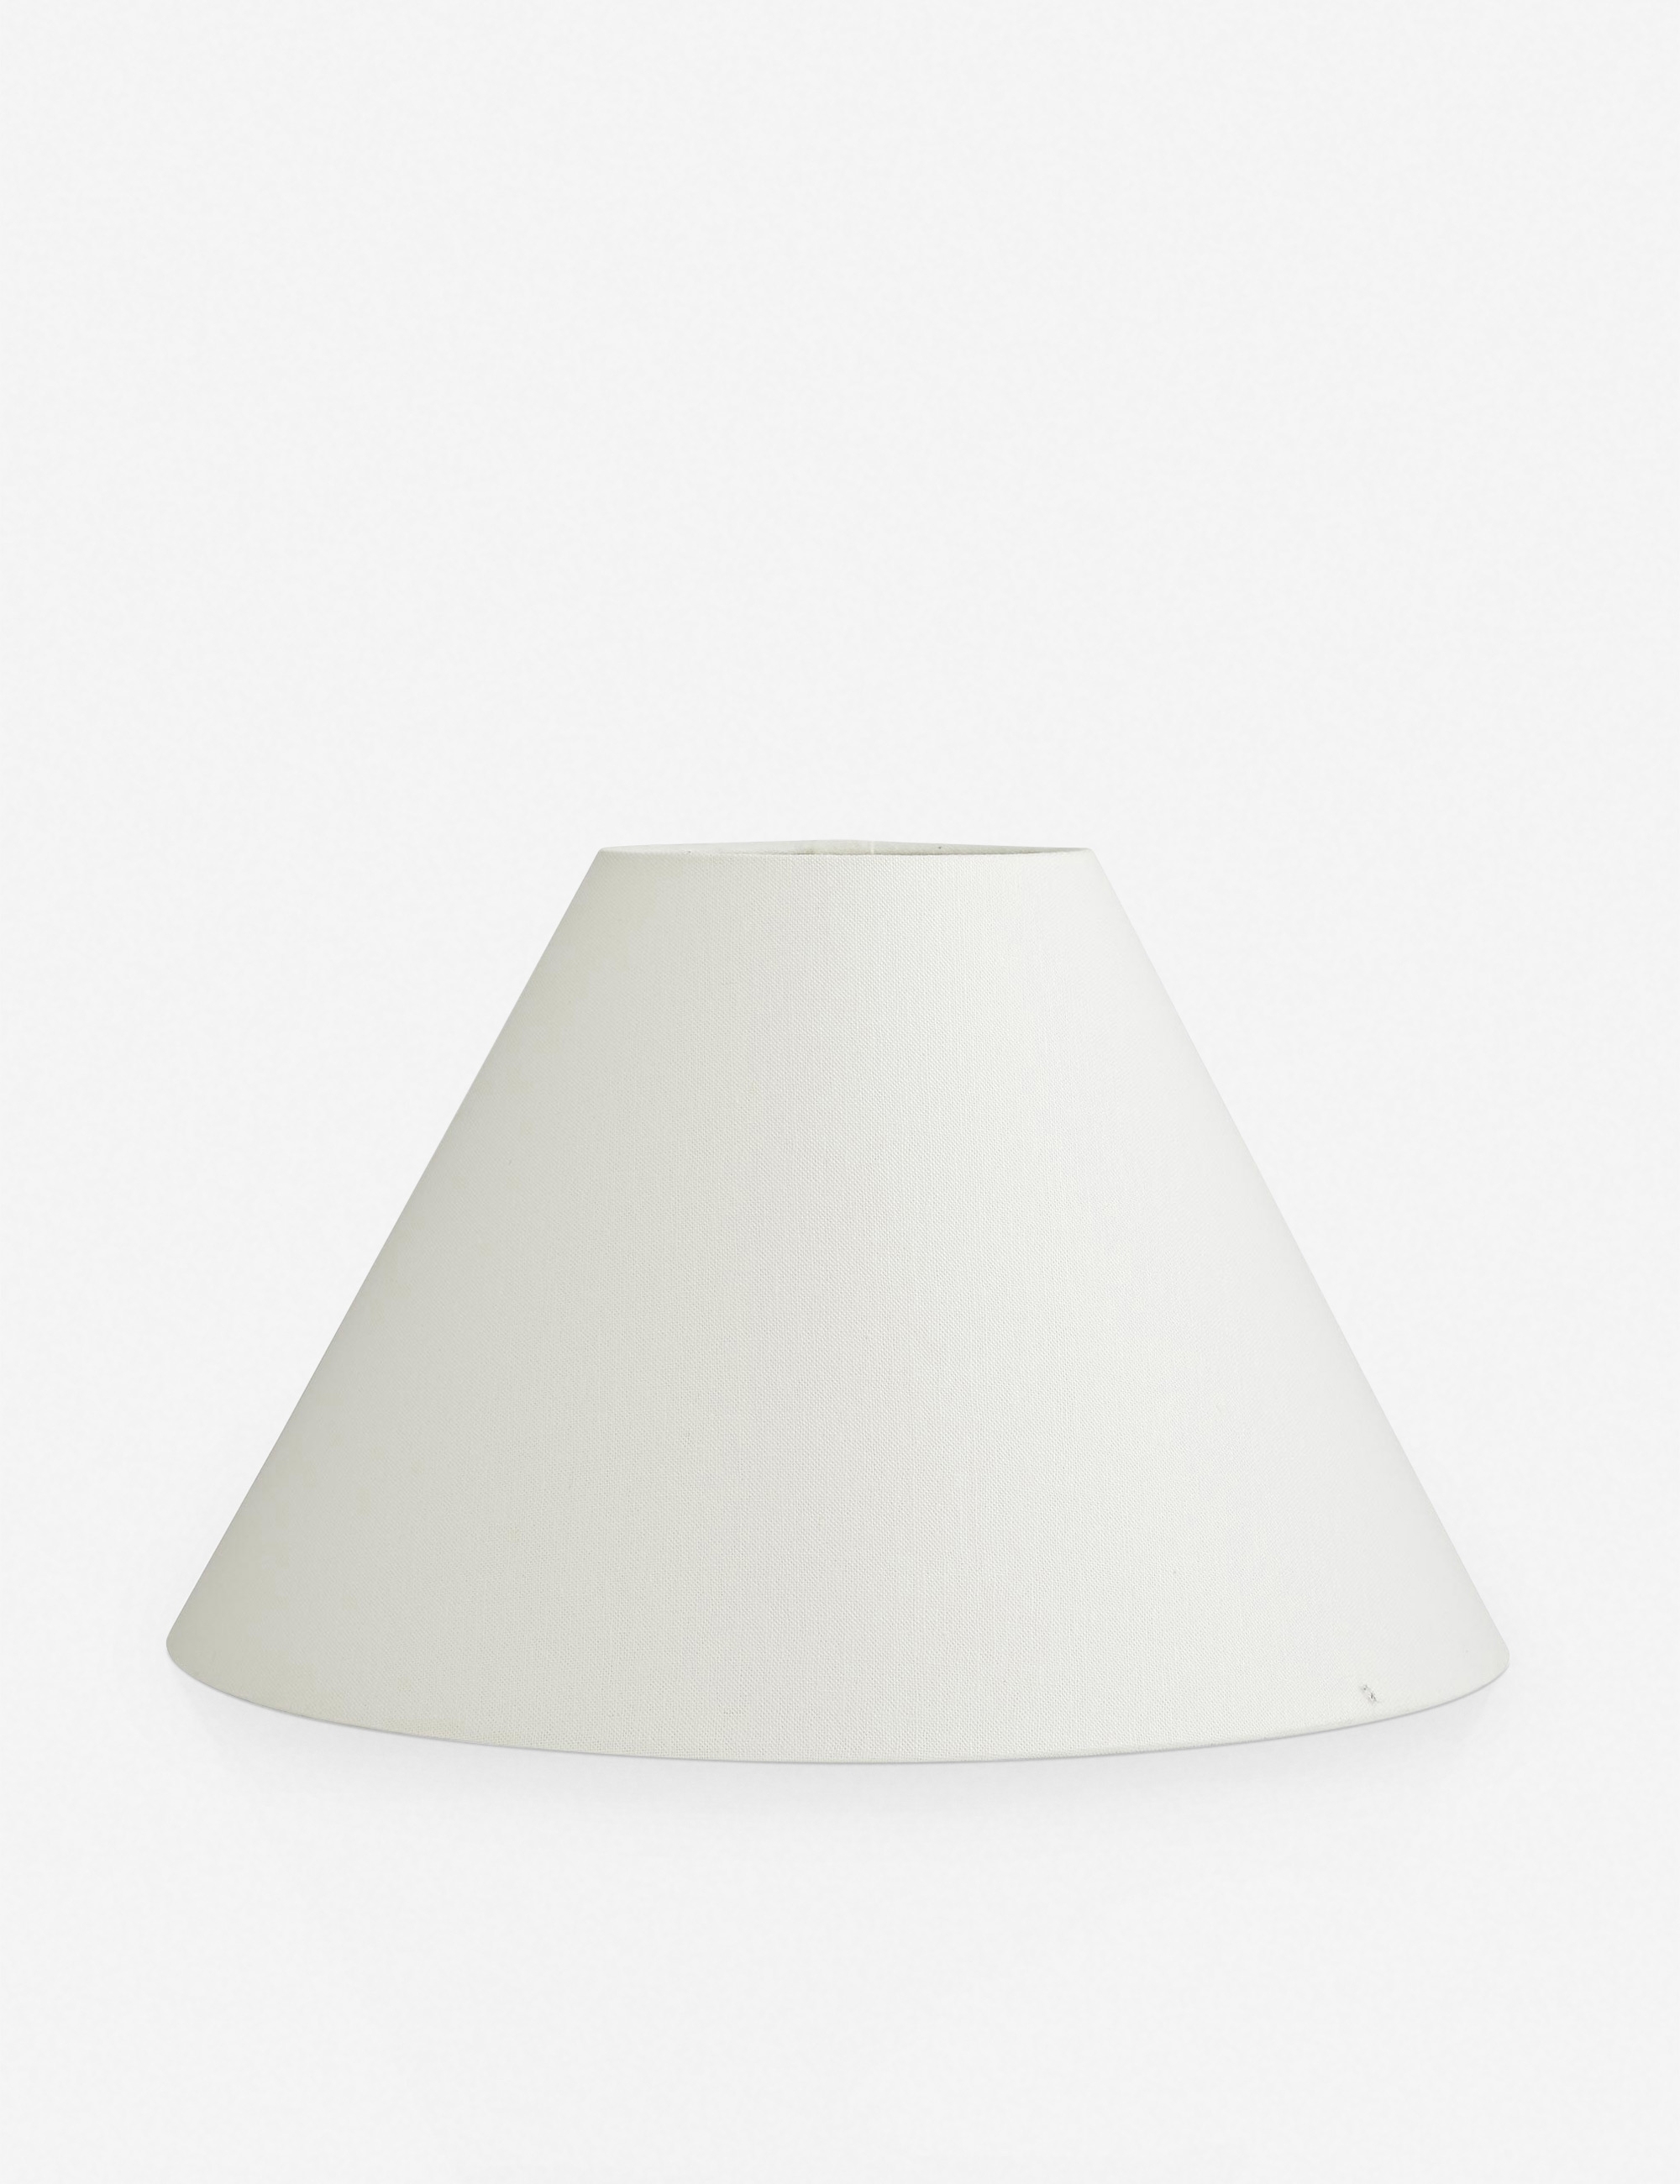 Putney Table Lamp by Arteriors - Image 2